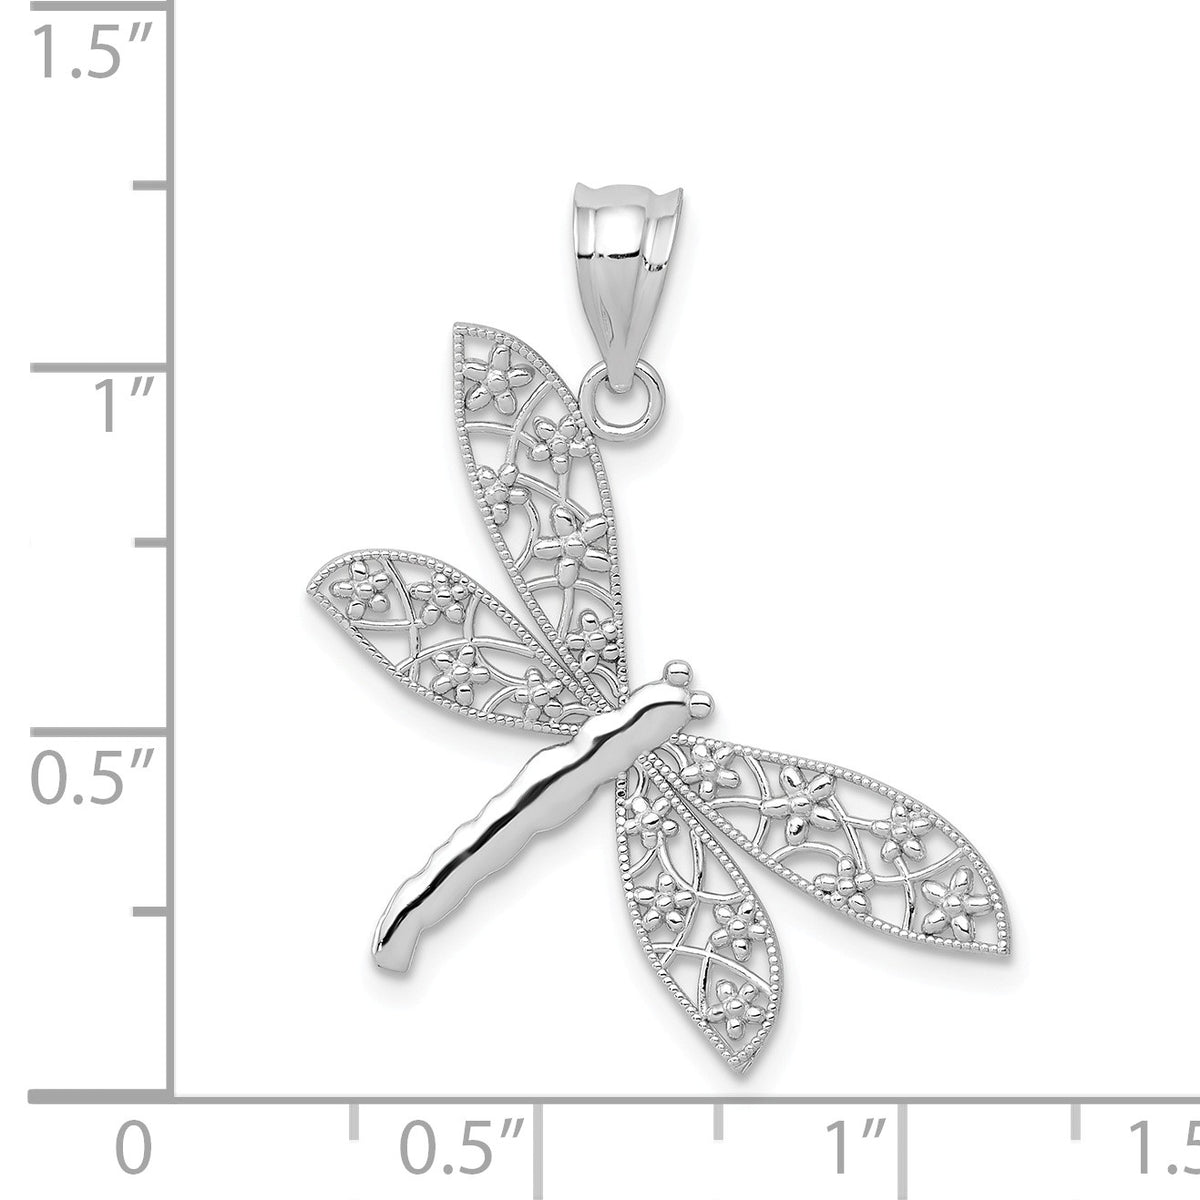 Alternate view of the 14k White Gold Floral Winged Dragonfly Pendant, 28mm by The Black Bow Jewelry Co.